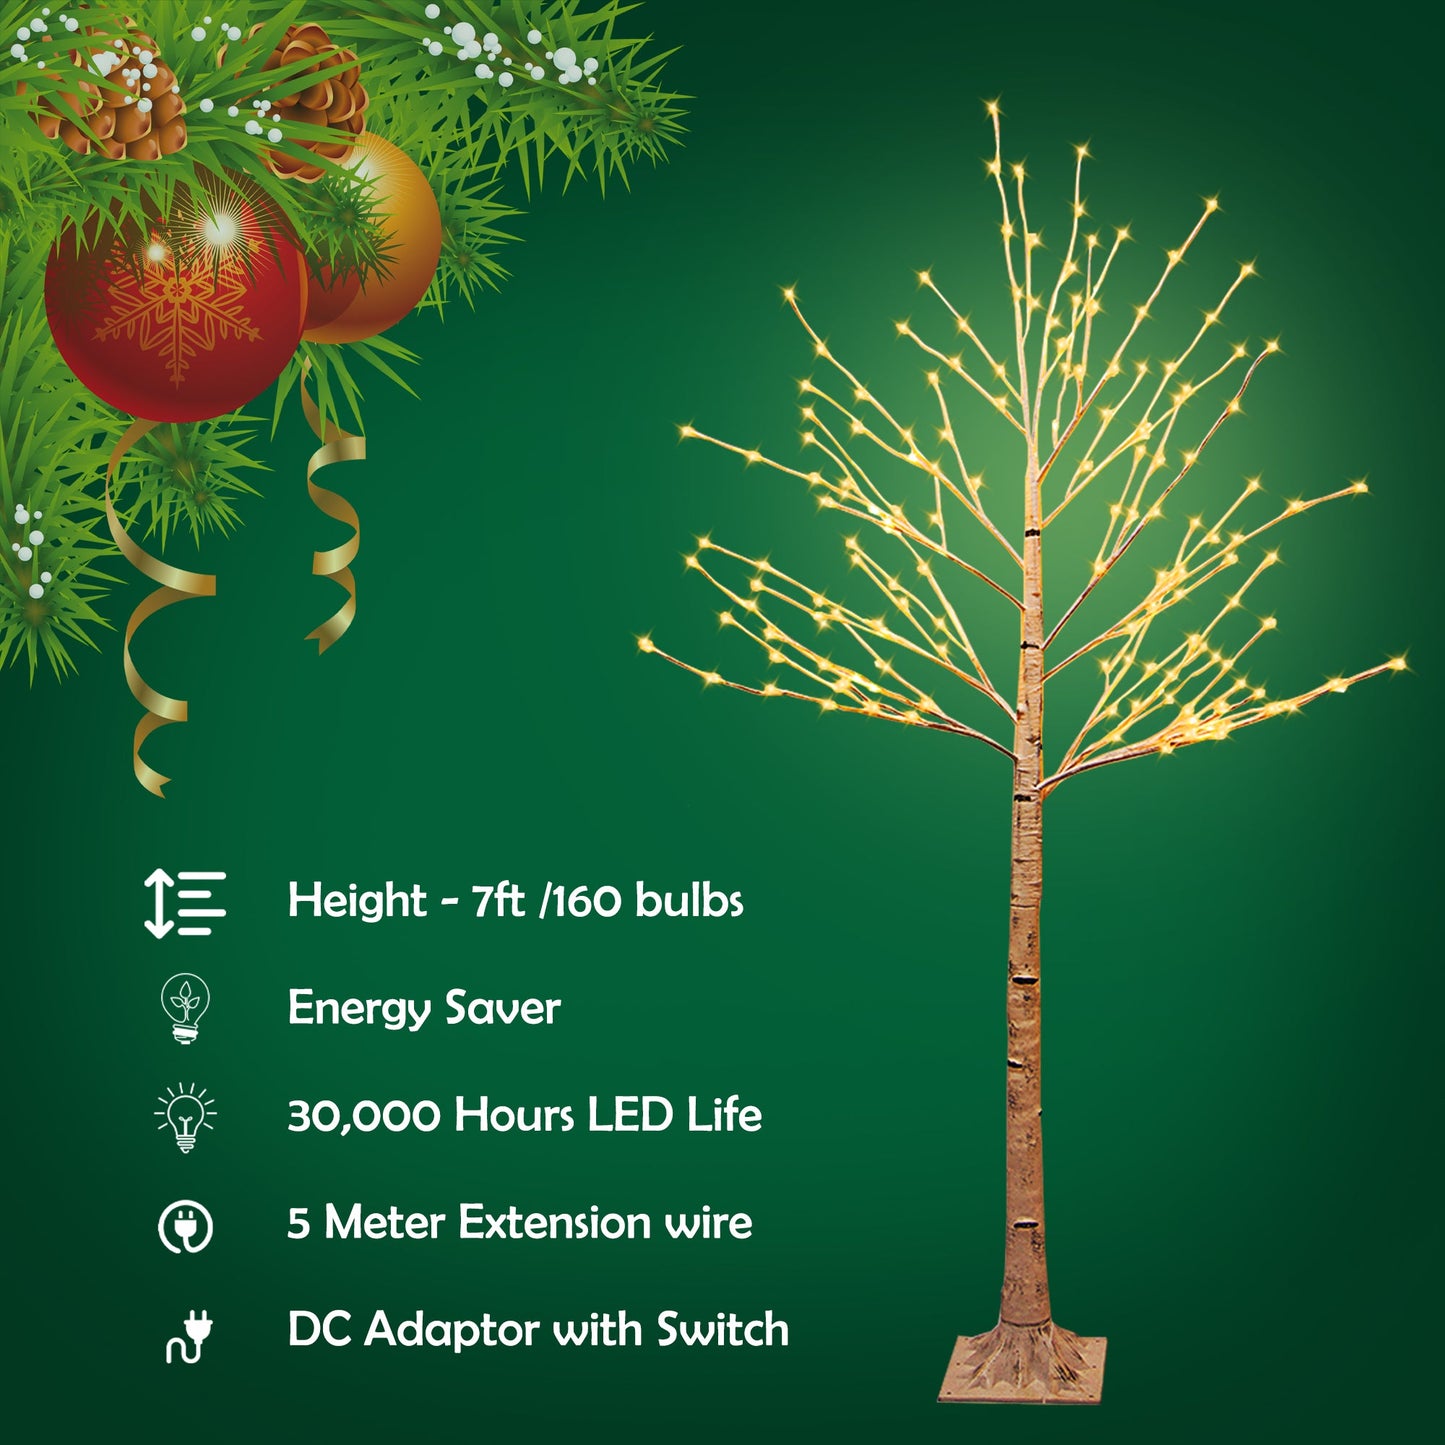 Artificial LED Light Christmas tree, 7 Ft Height White birch tree with 160 Bulbs.